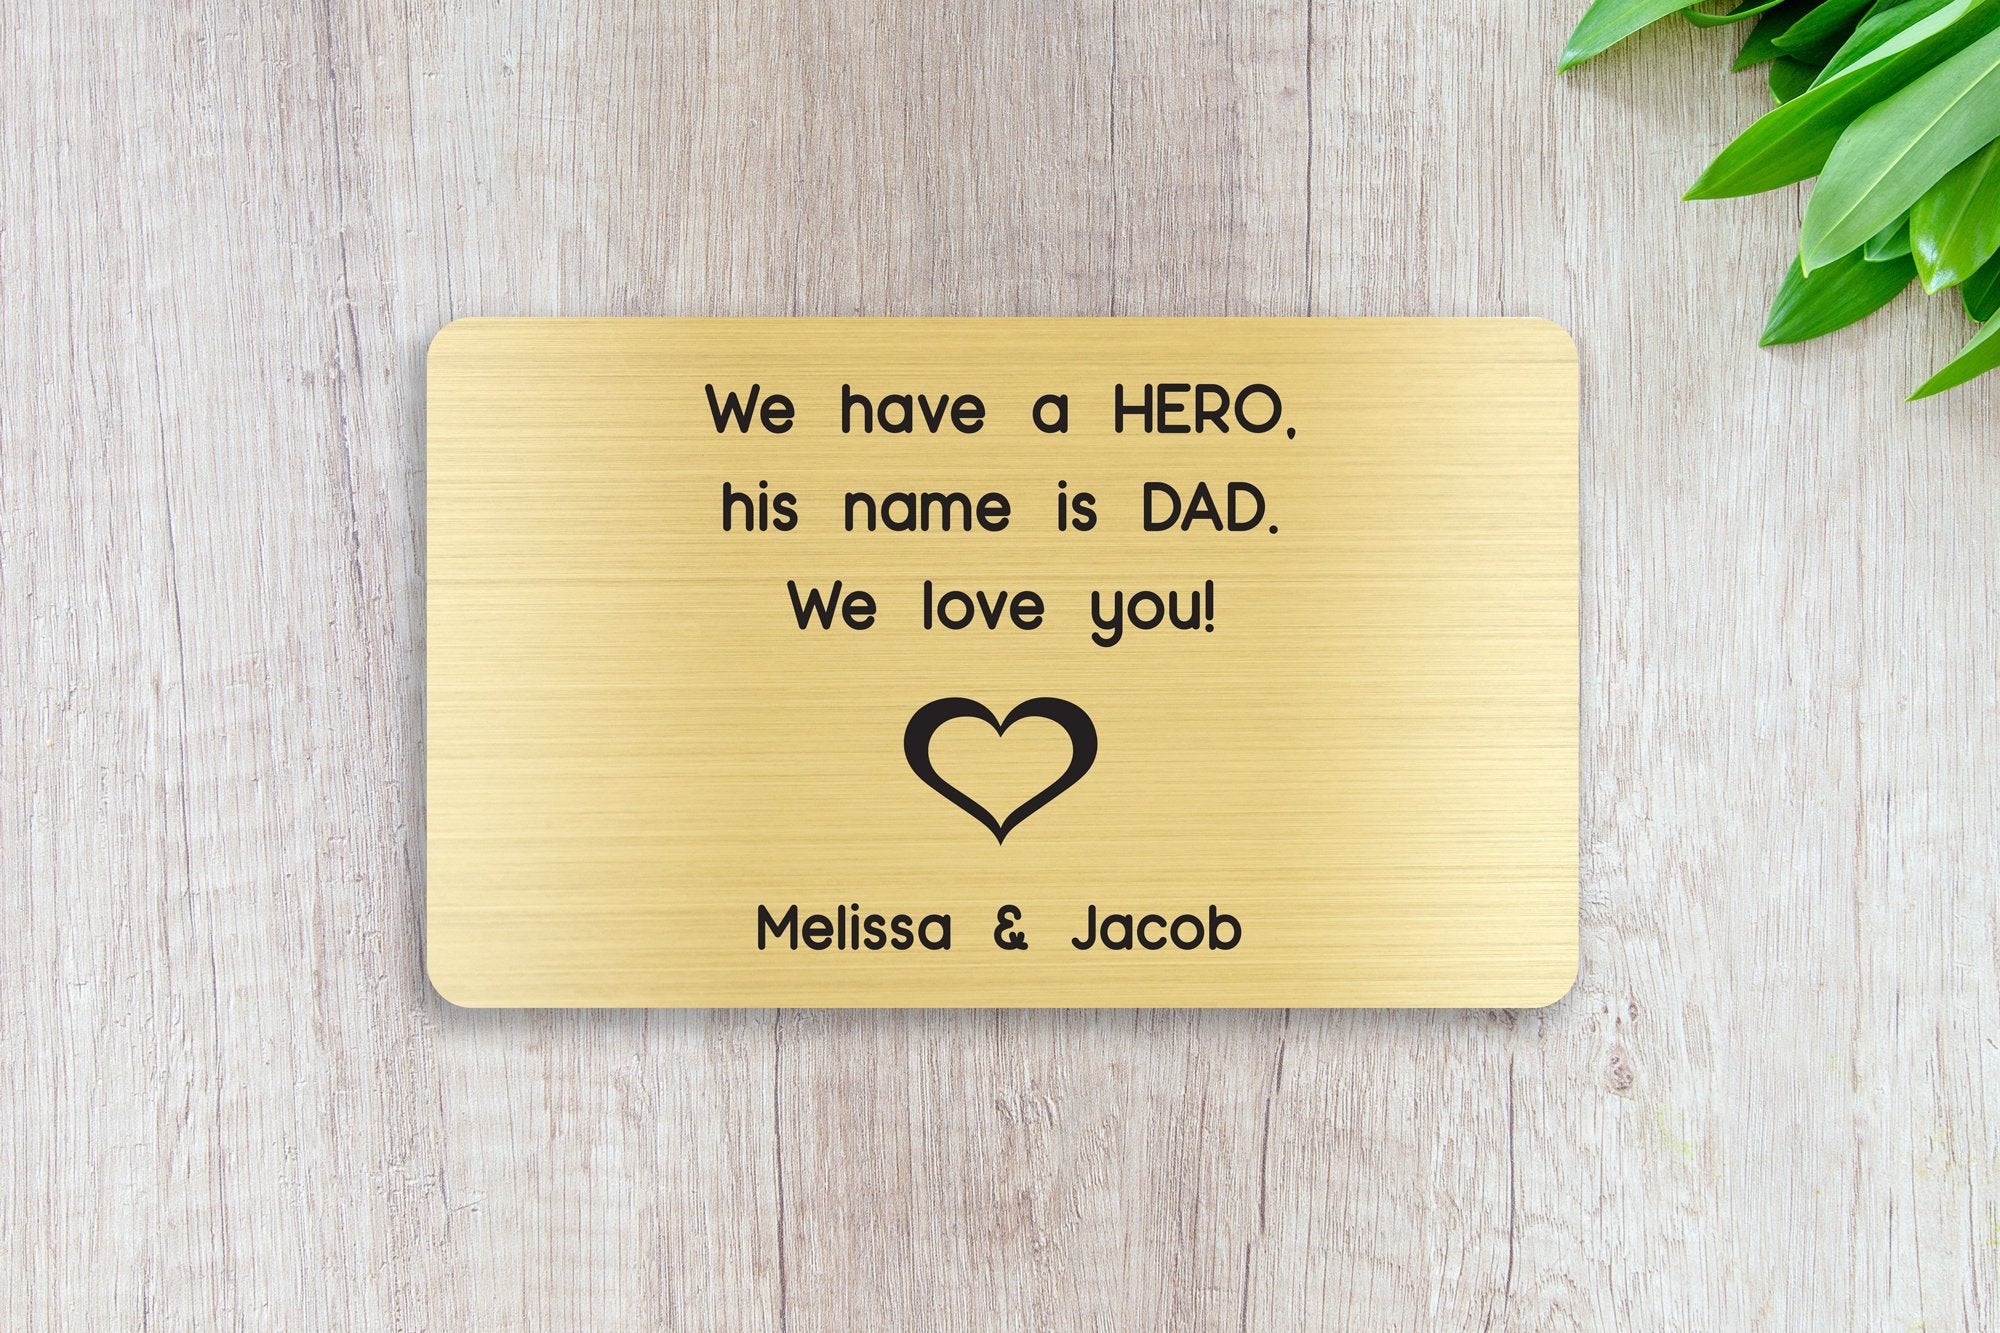 Personalized Engraved Wallet Card Insert, Gift for Dad, Father's Day, From the Kids, Gold